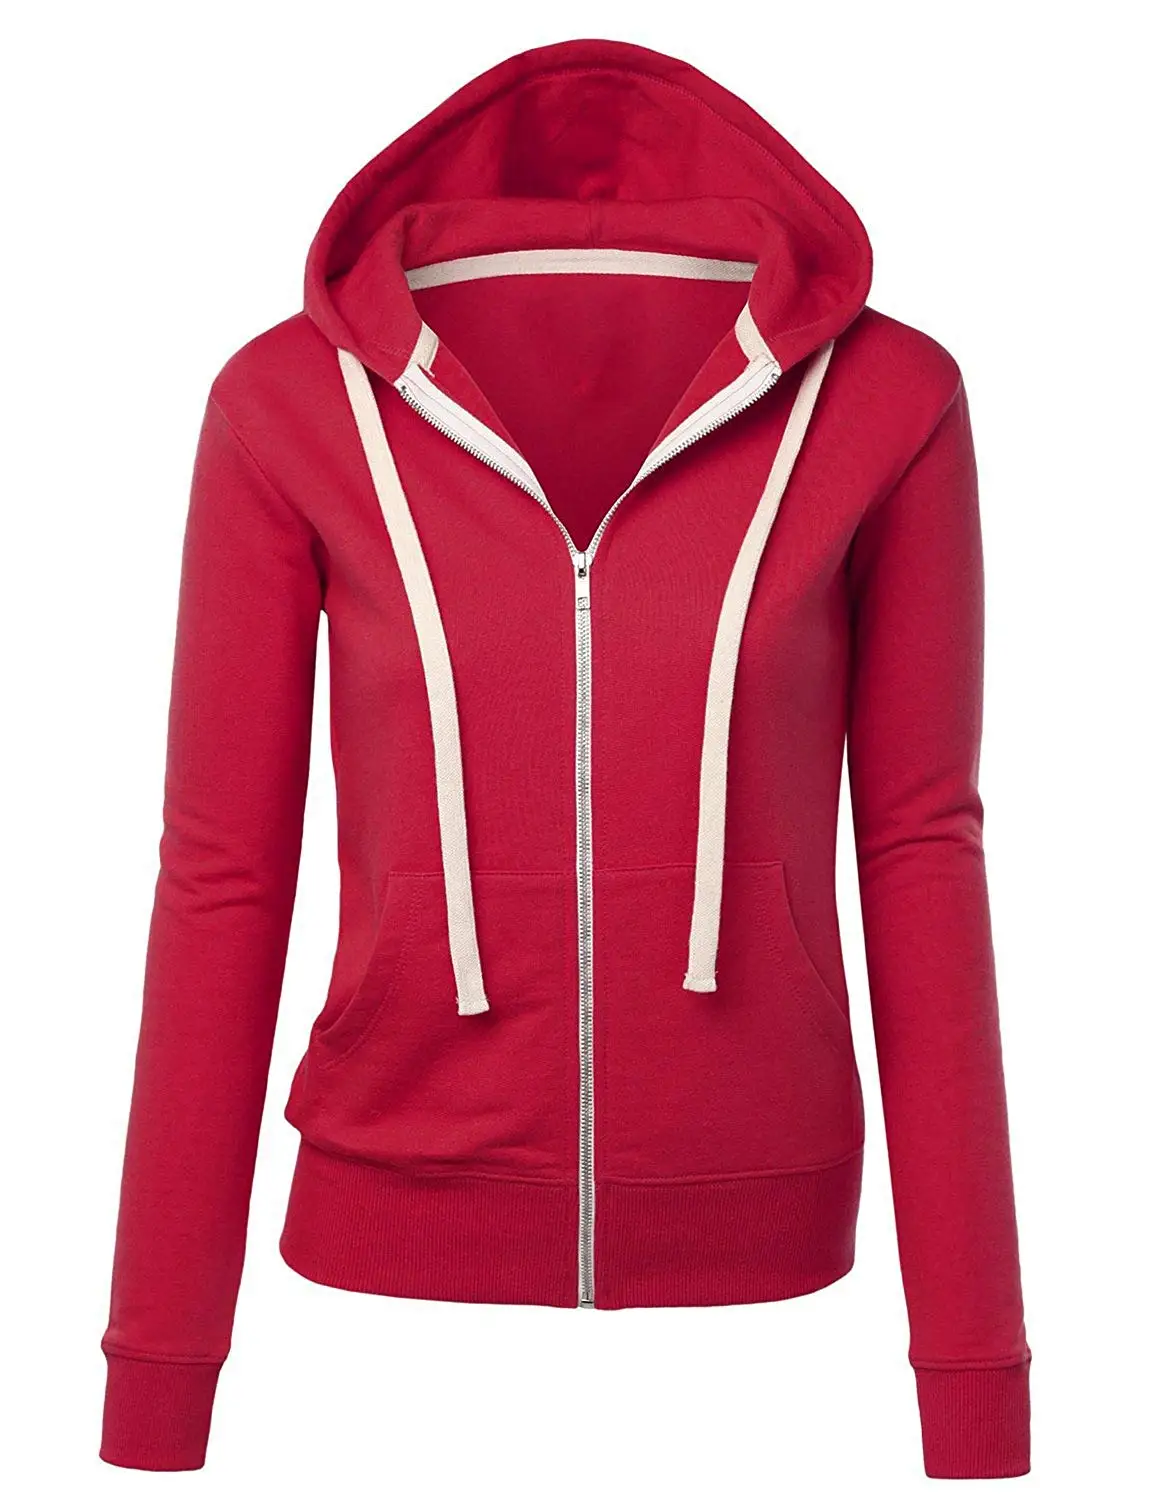 Cheap Plain Red Hoodie, find Plain Red Hoodie deals on line at Alibaba.com